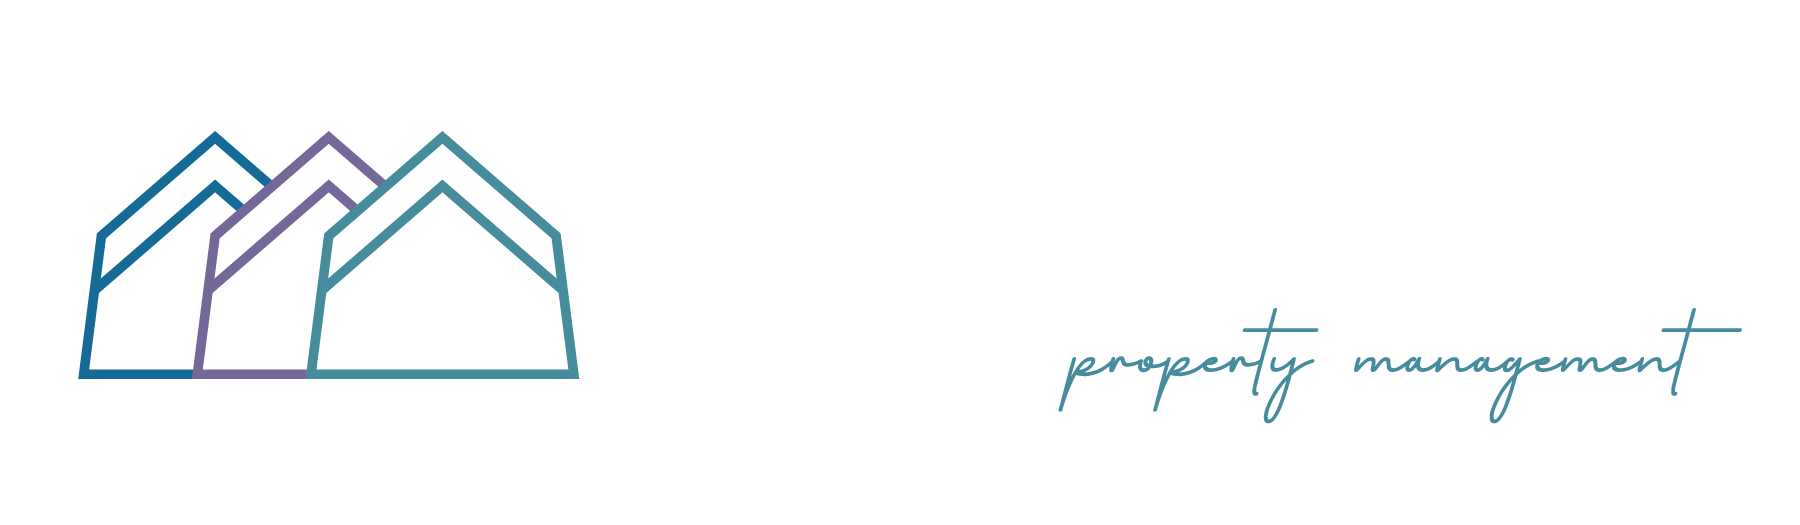 Shelter Well Header Logo - Select to go to Home Page